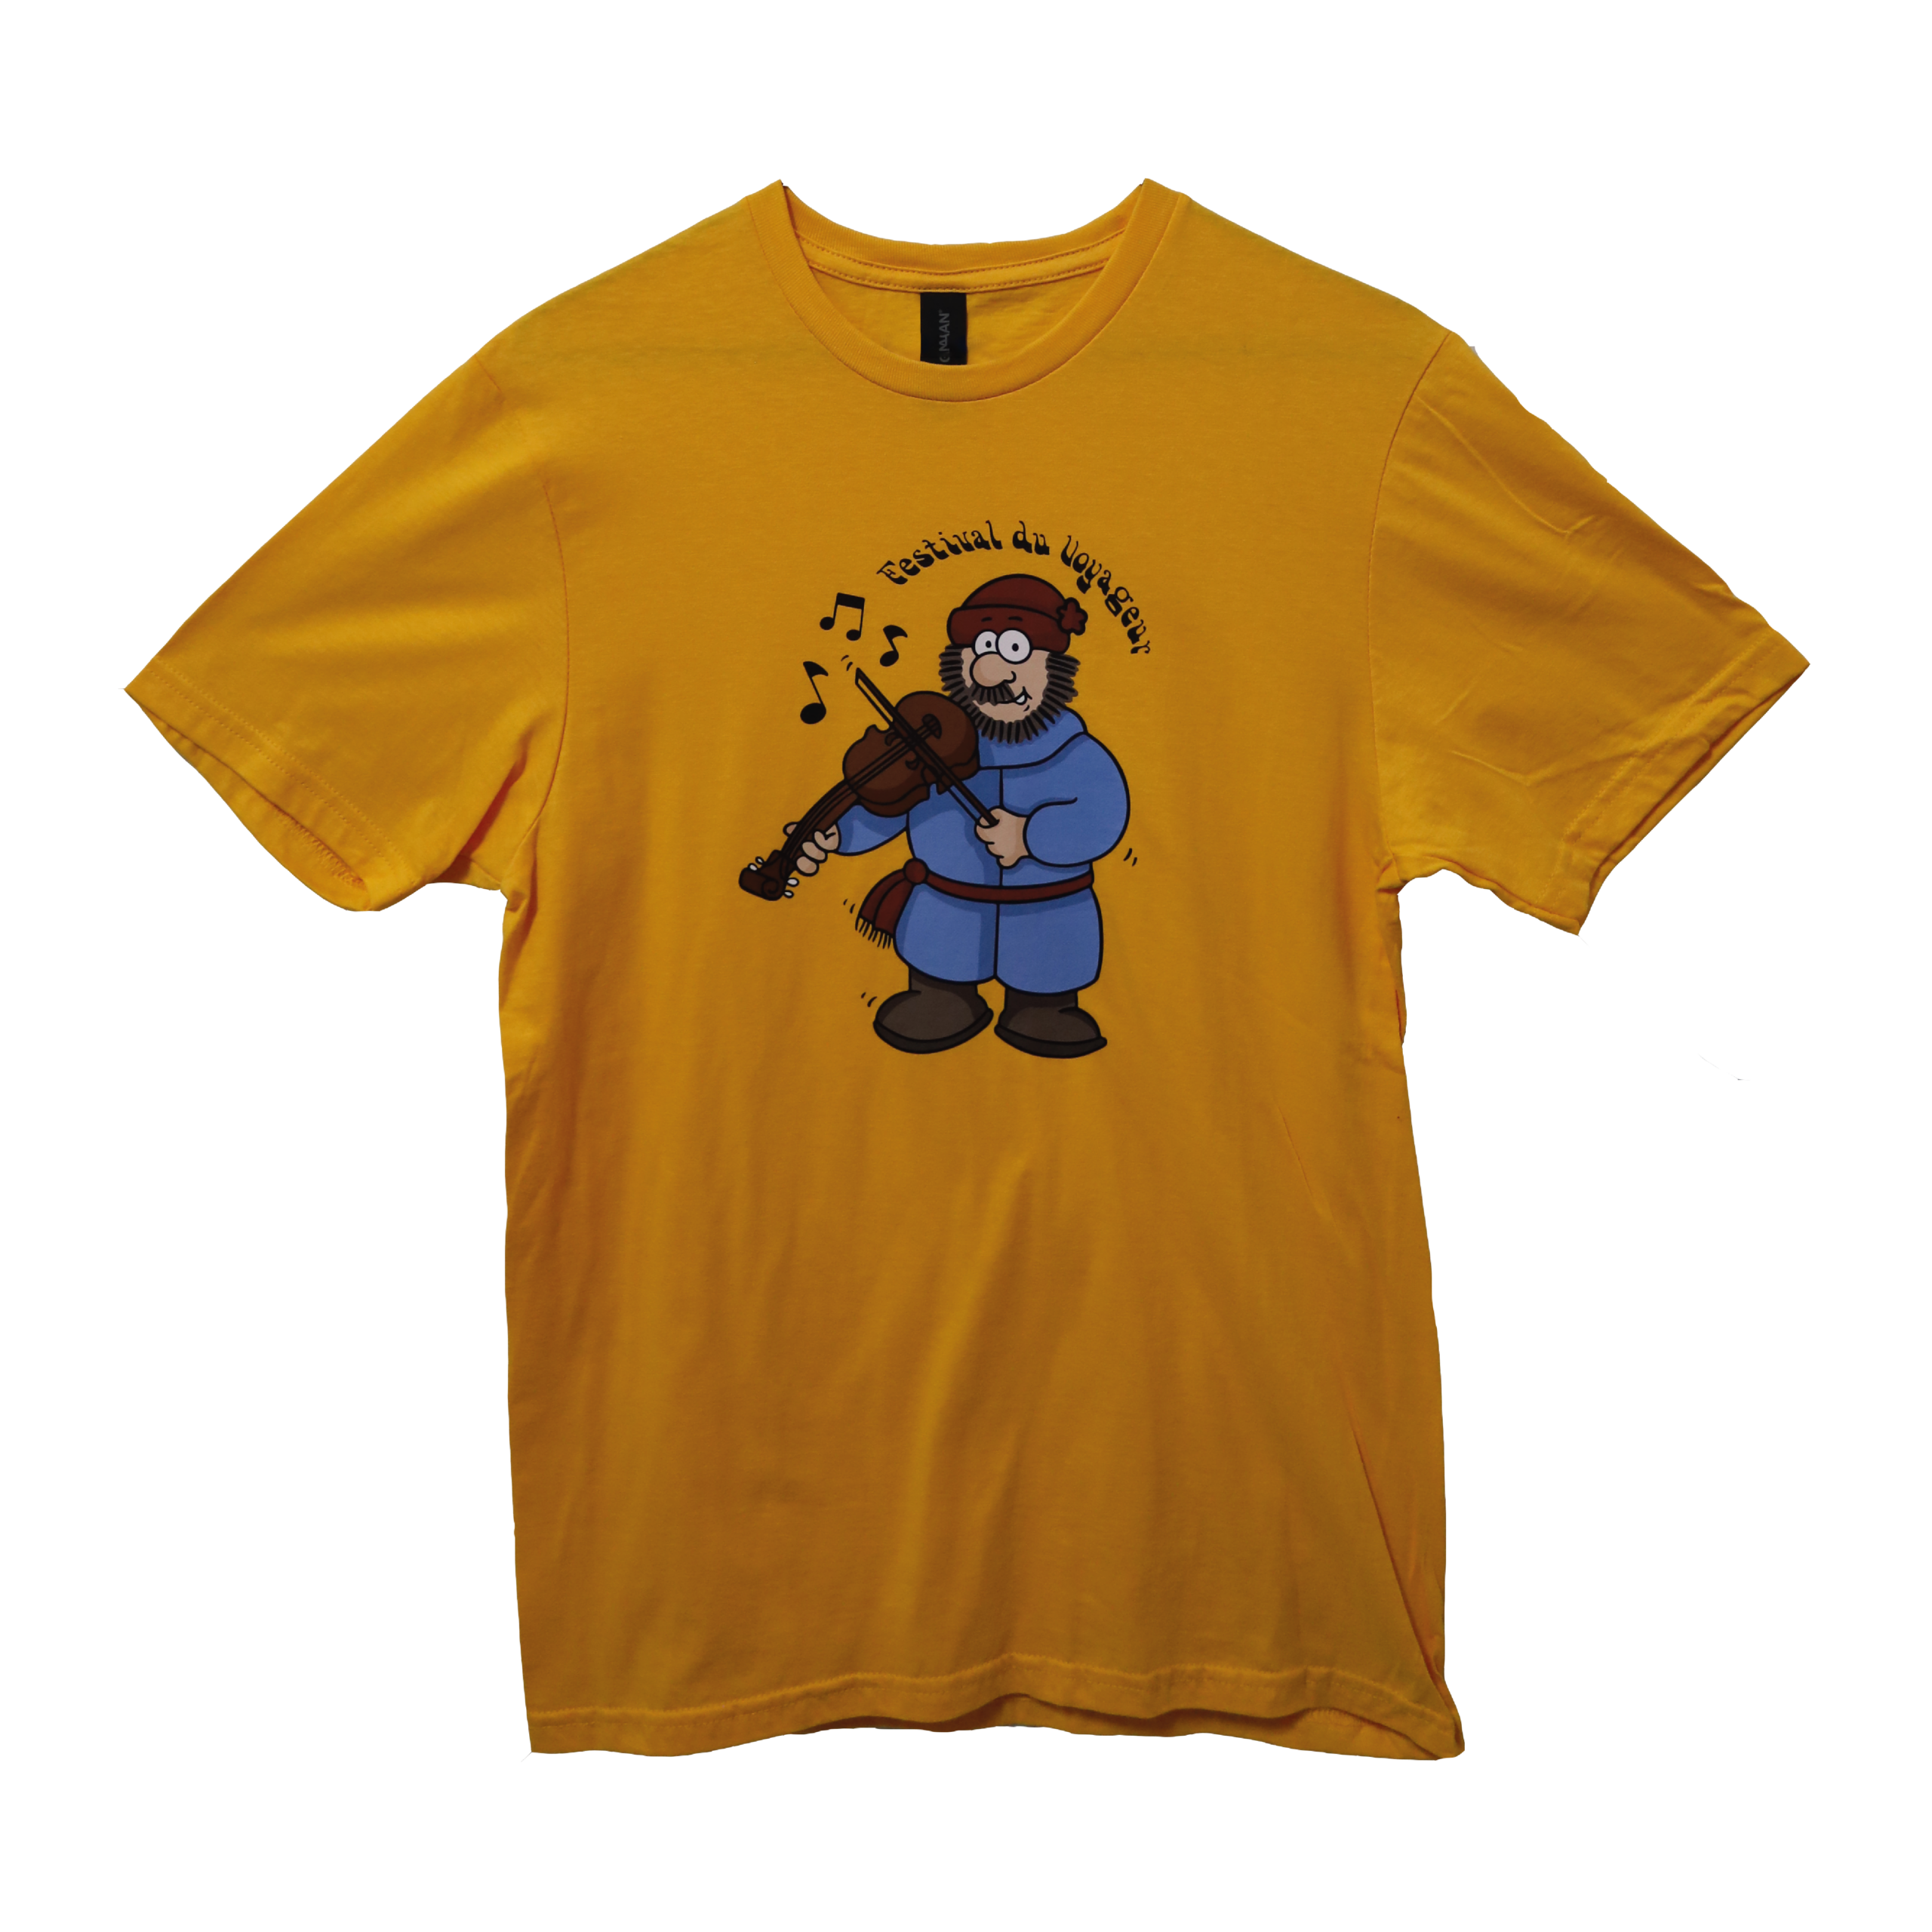 Featured image for “FIDDLE T-SHIRT”